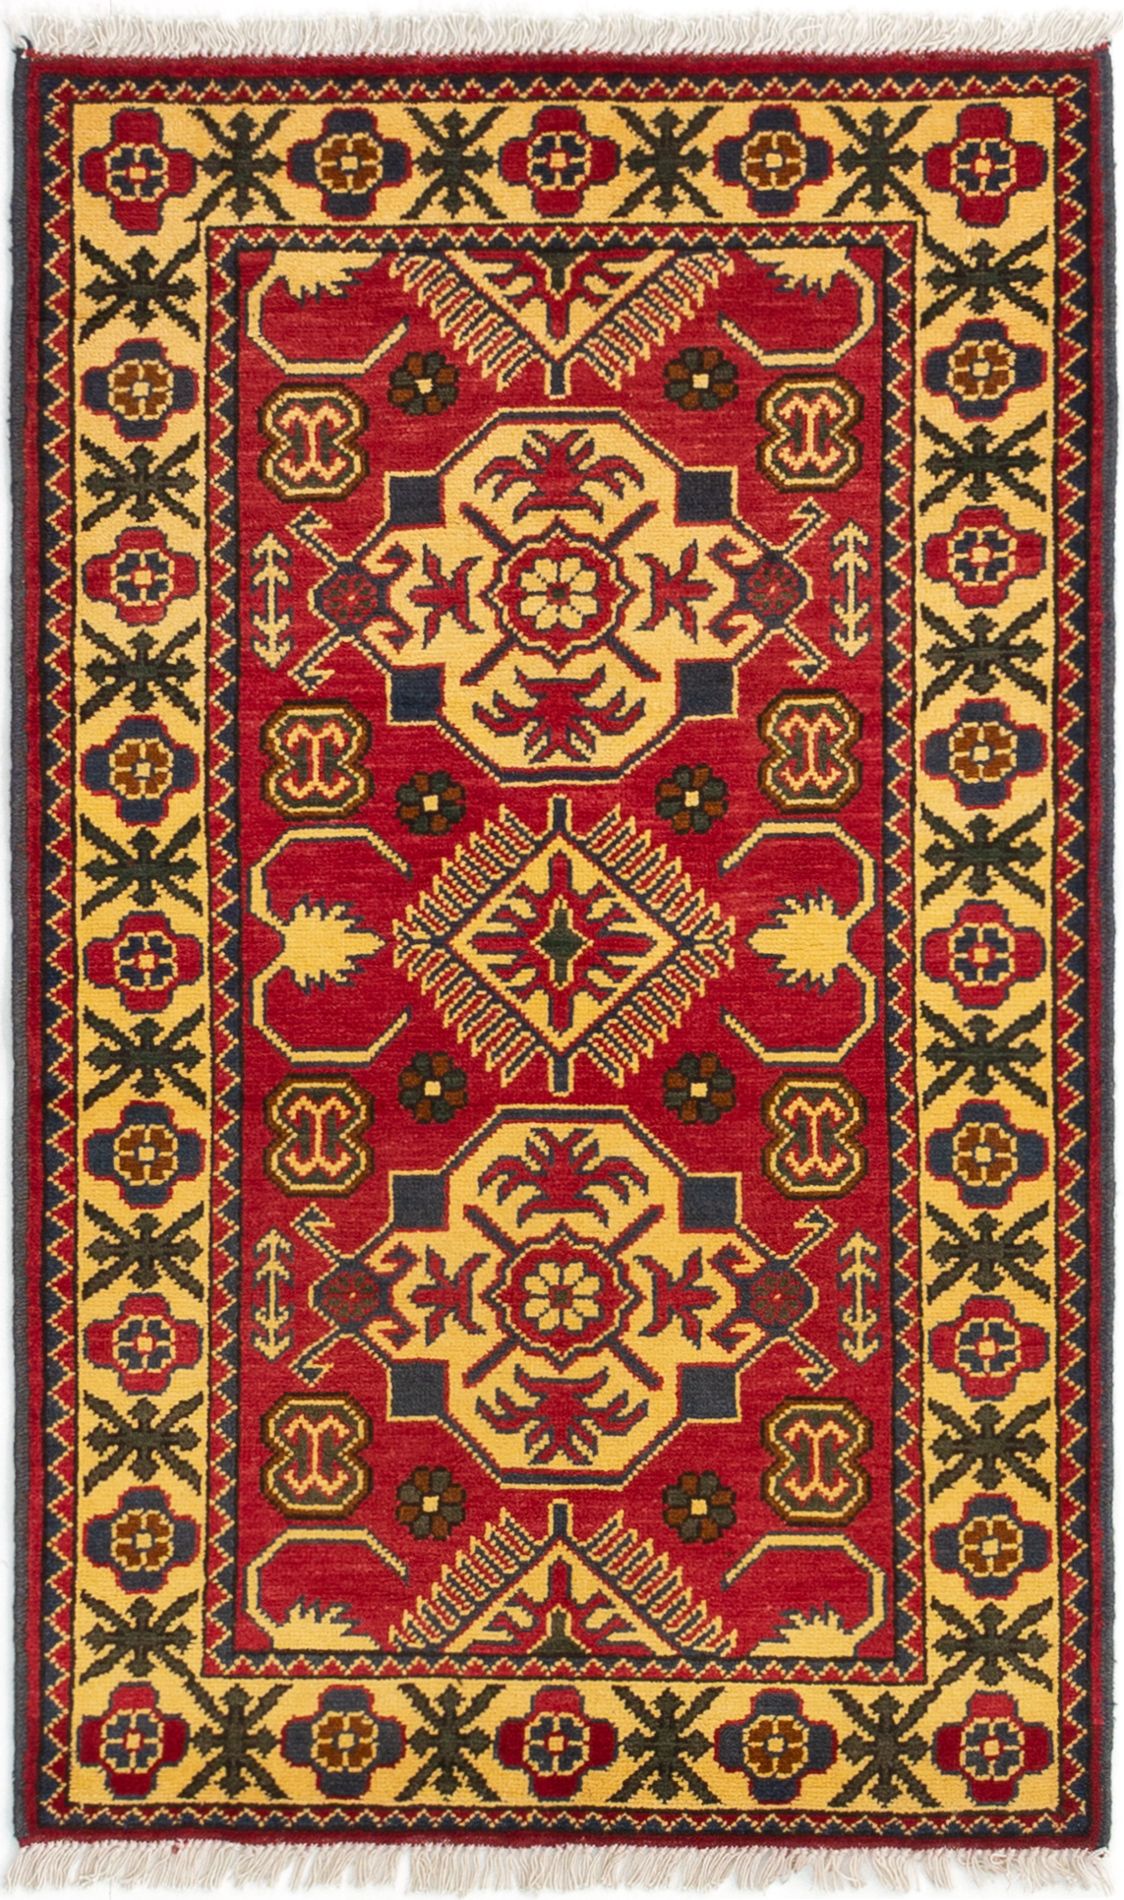 Hand-knotted Finest Kargahi Red Wool Rug 2'8" x 4'5" Size: 2'8" x 4'5"  